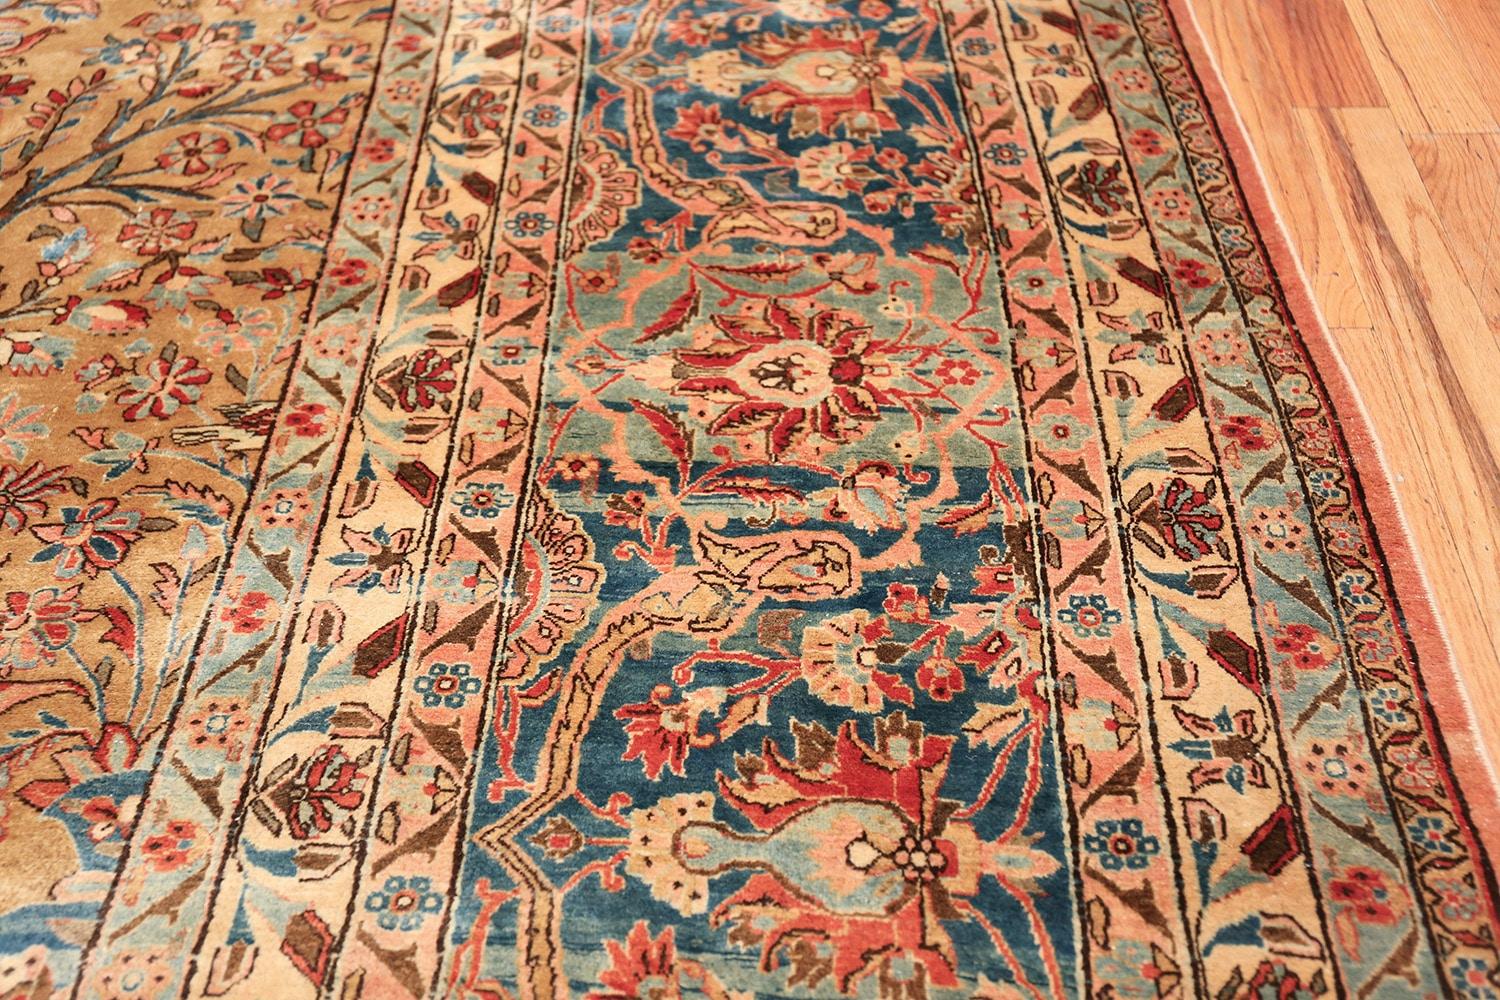 Hand-Knotted Tree of Life Design Antique Persian Kashan Rug. 13' 8